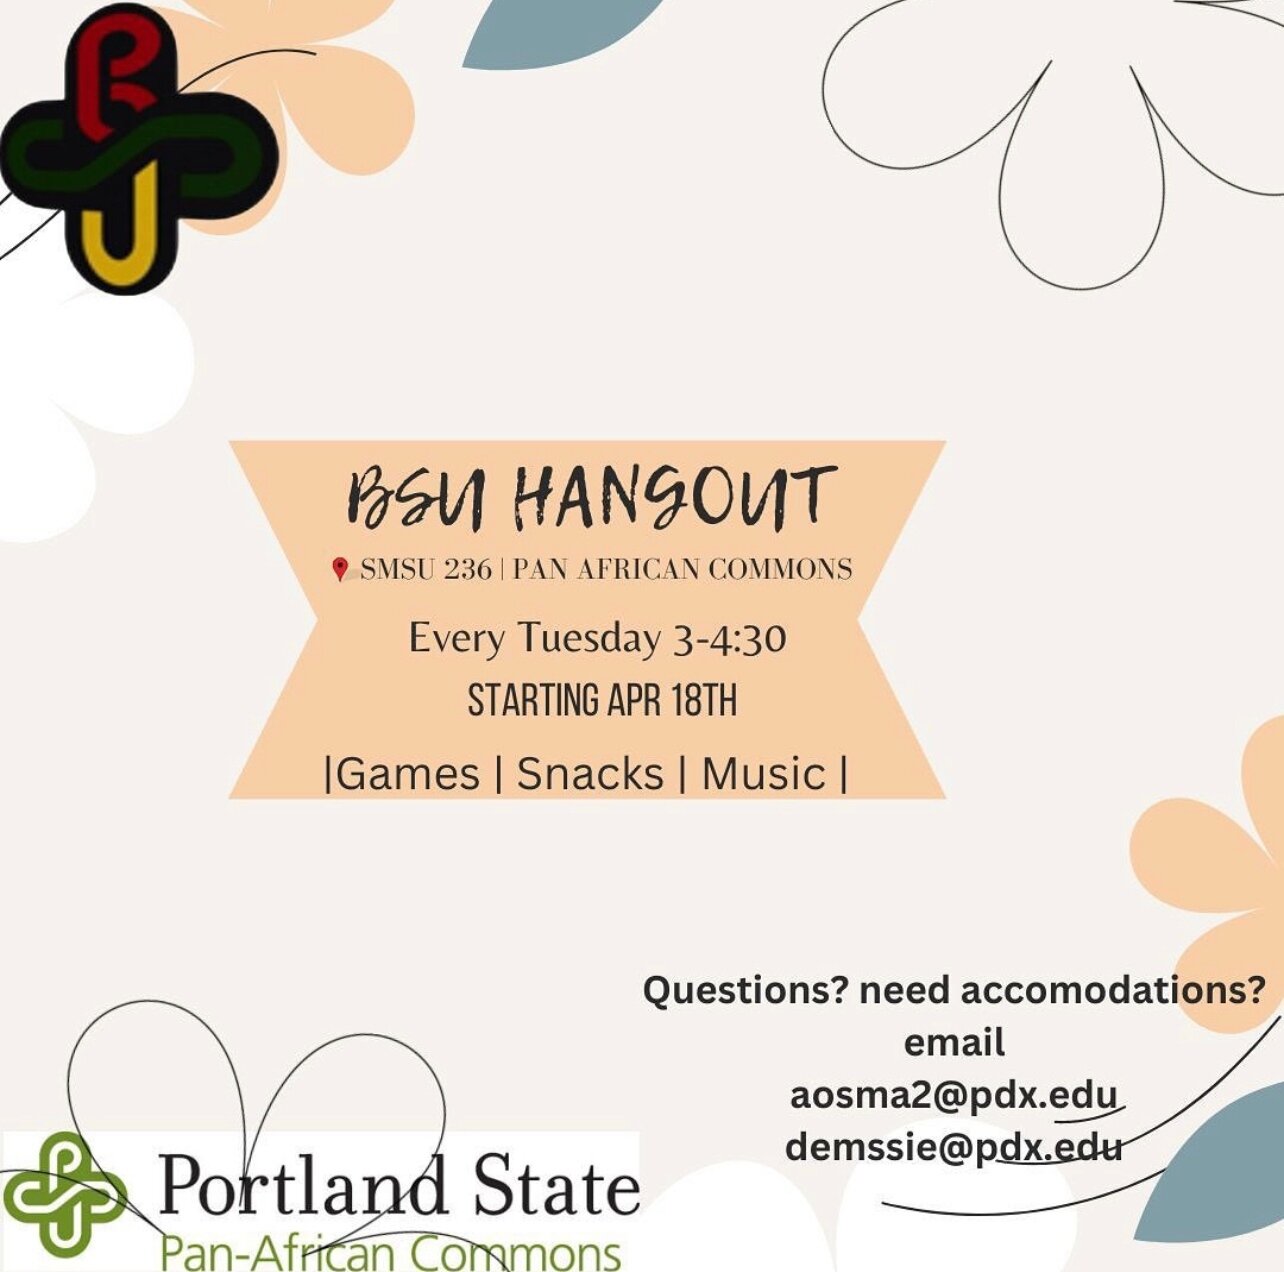 Tuesday! 4/18
@bsupdx

&ldquo;Hello BSU family (&gt;, BSU hangout is starting back
again this term on Tuesday, April 18th. It will be at the Pan
African Commons (SMSU 236) every Tuesday from
3:00-4:30 pm. There will be amazing music, snacks, and
grea